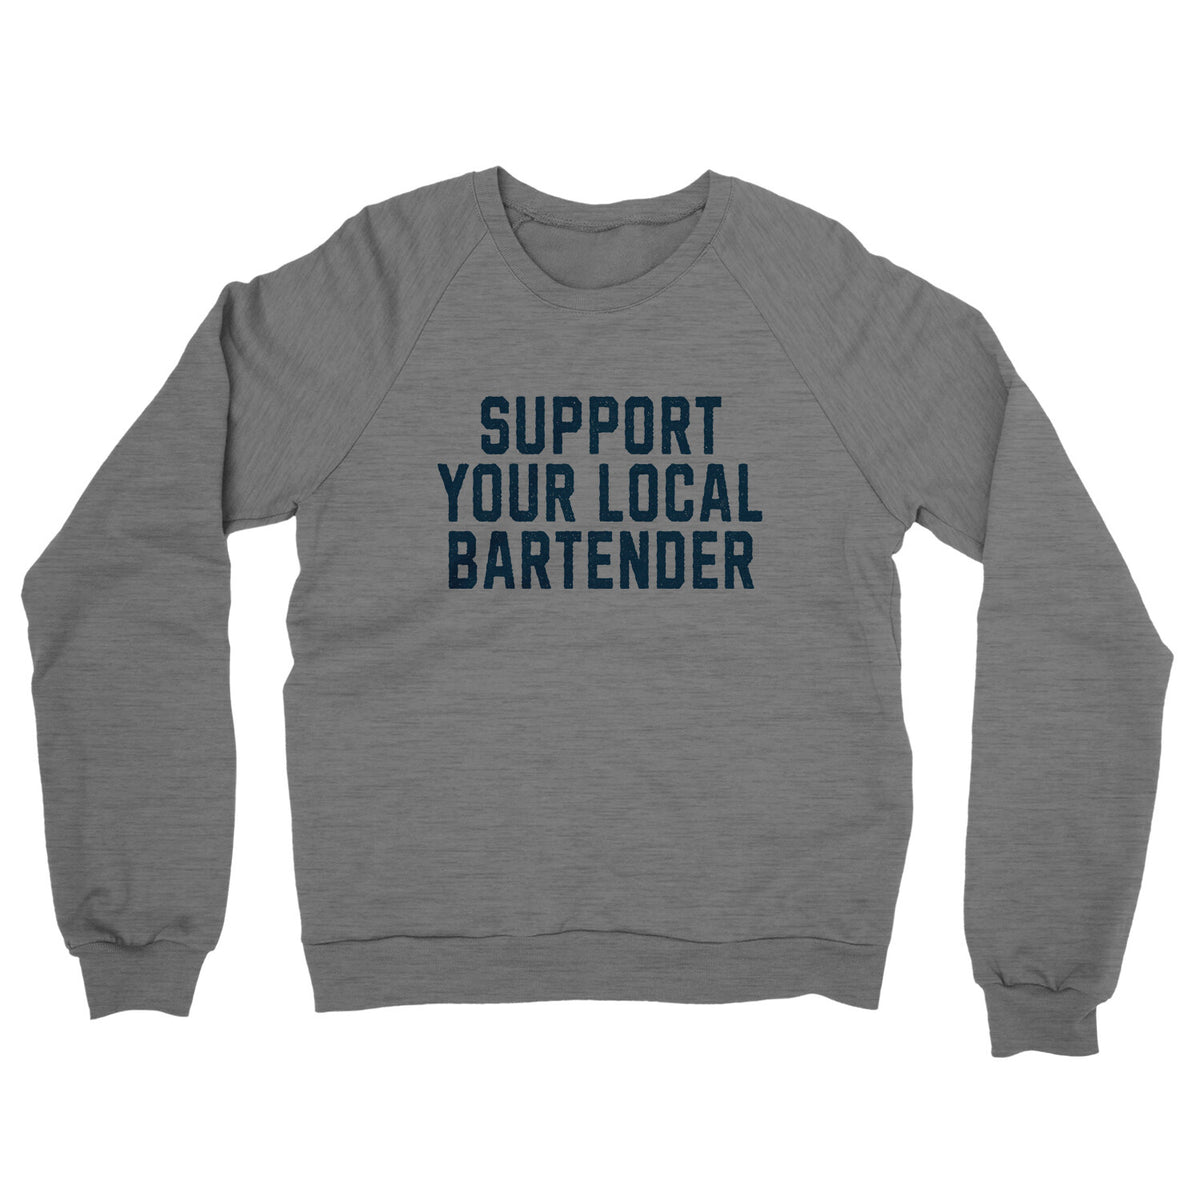 Support your Local Bartender in Graphite Heather Color